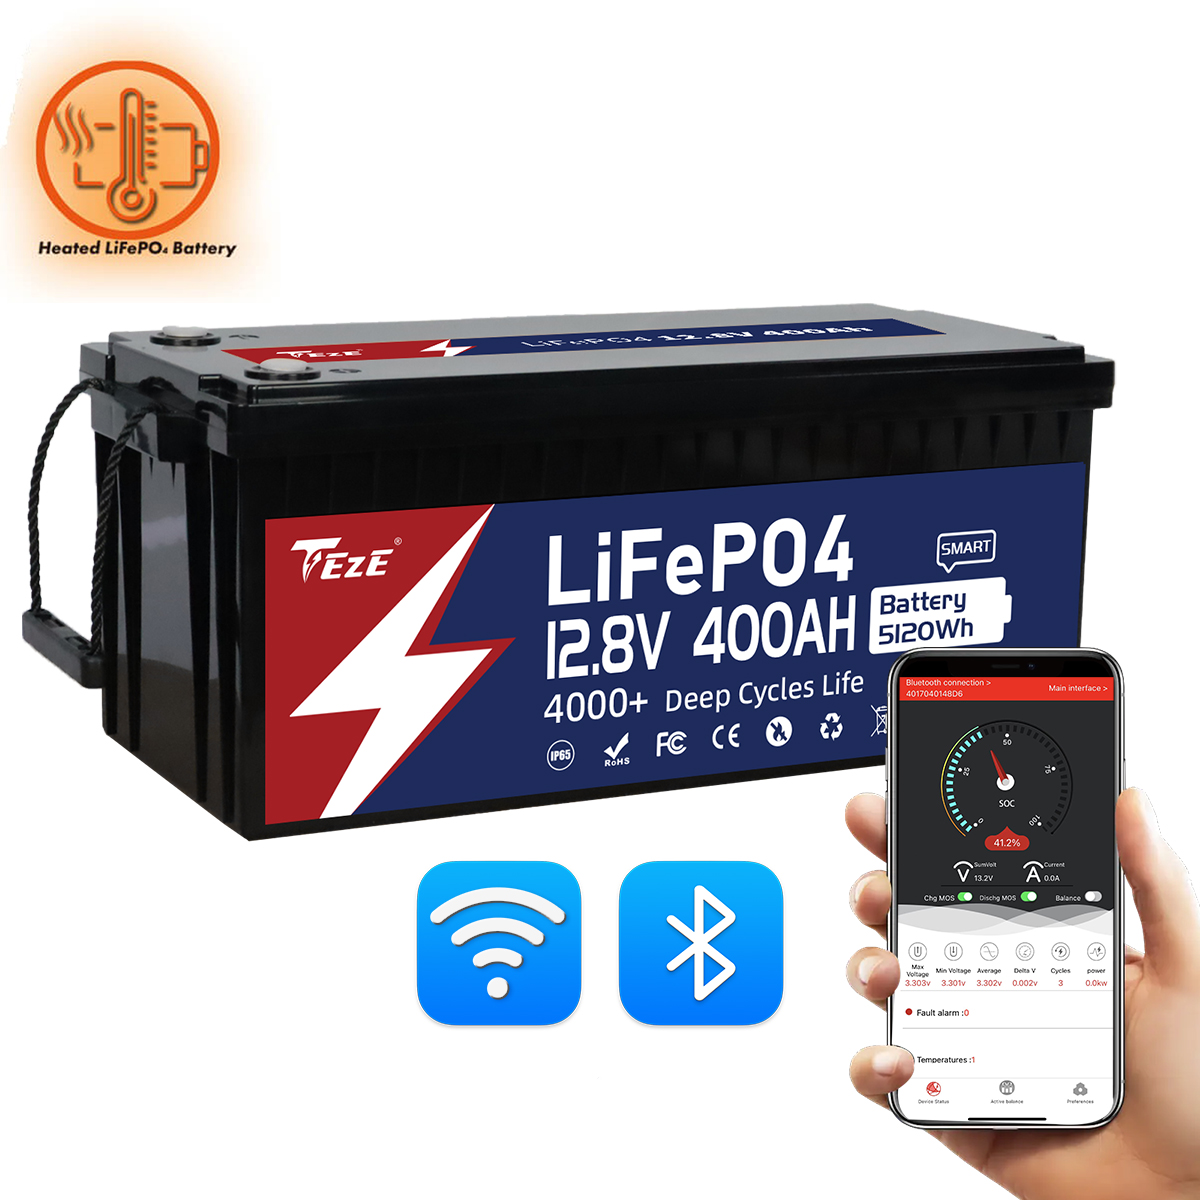 New Add WiFi-TezePower 12V 400Ah LiFePO4 Battery with WiFi and Bluetooth, Self-heating and Active Balancer, Built-in 250A Daly BMS(WiFi Built-in Version)-TezePower